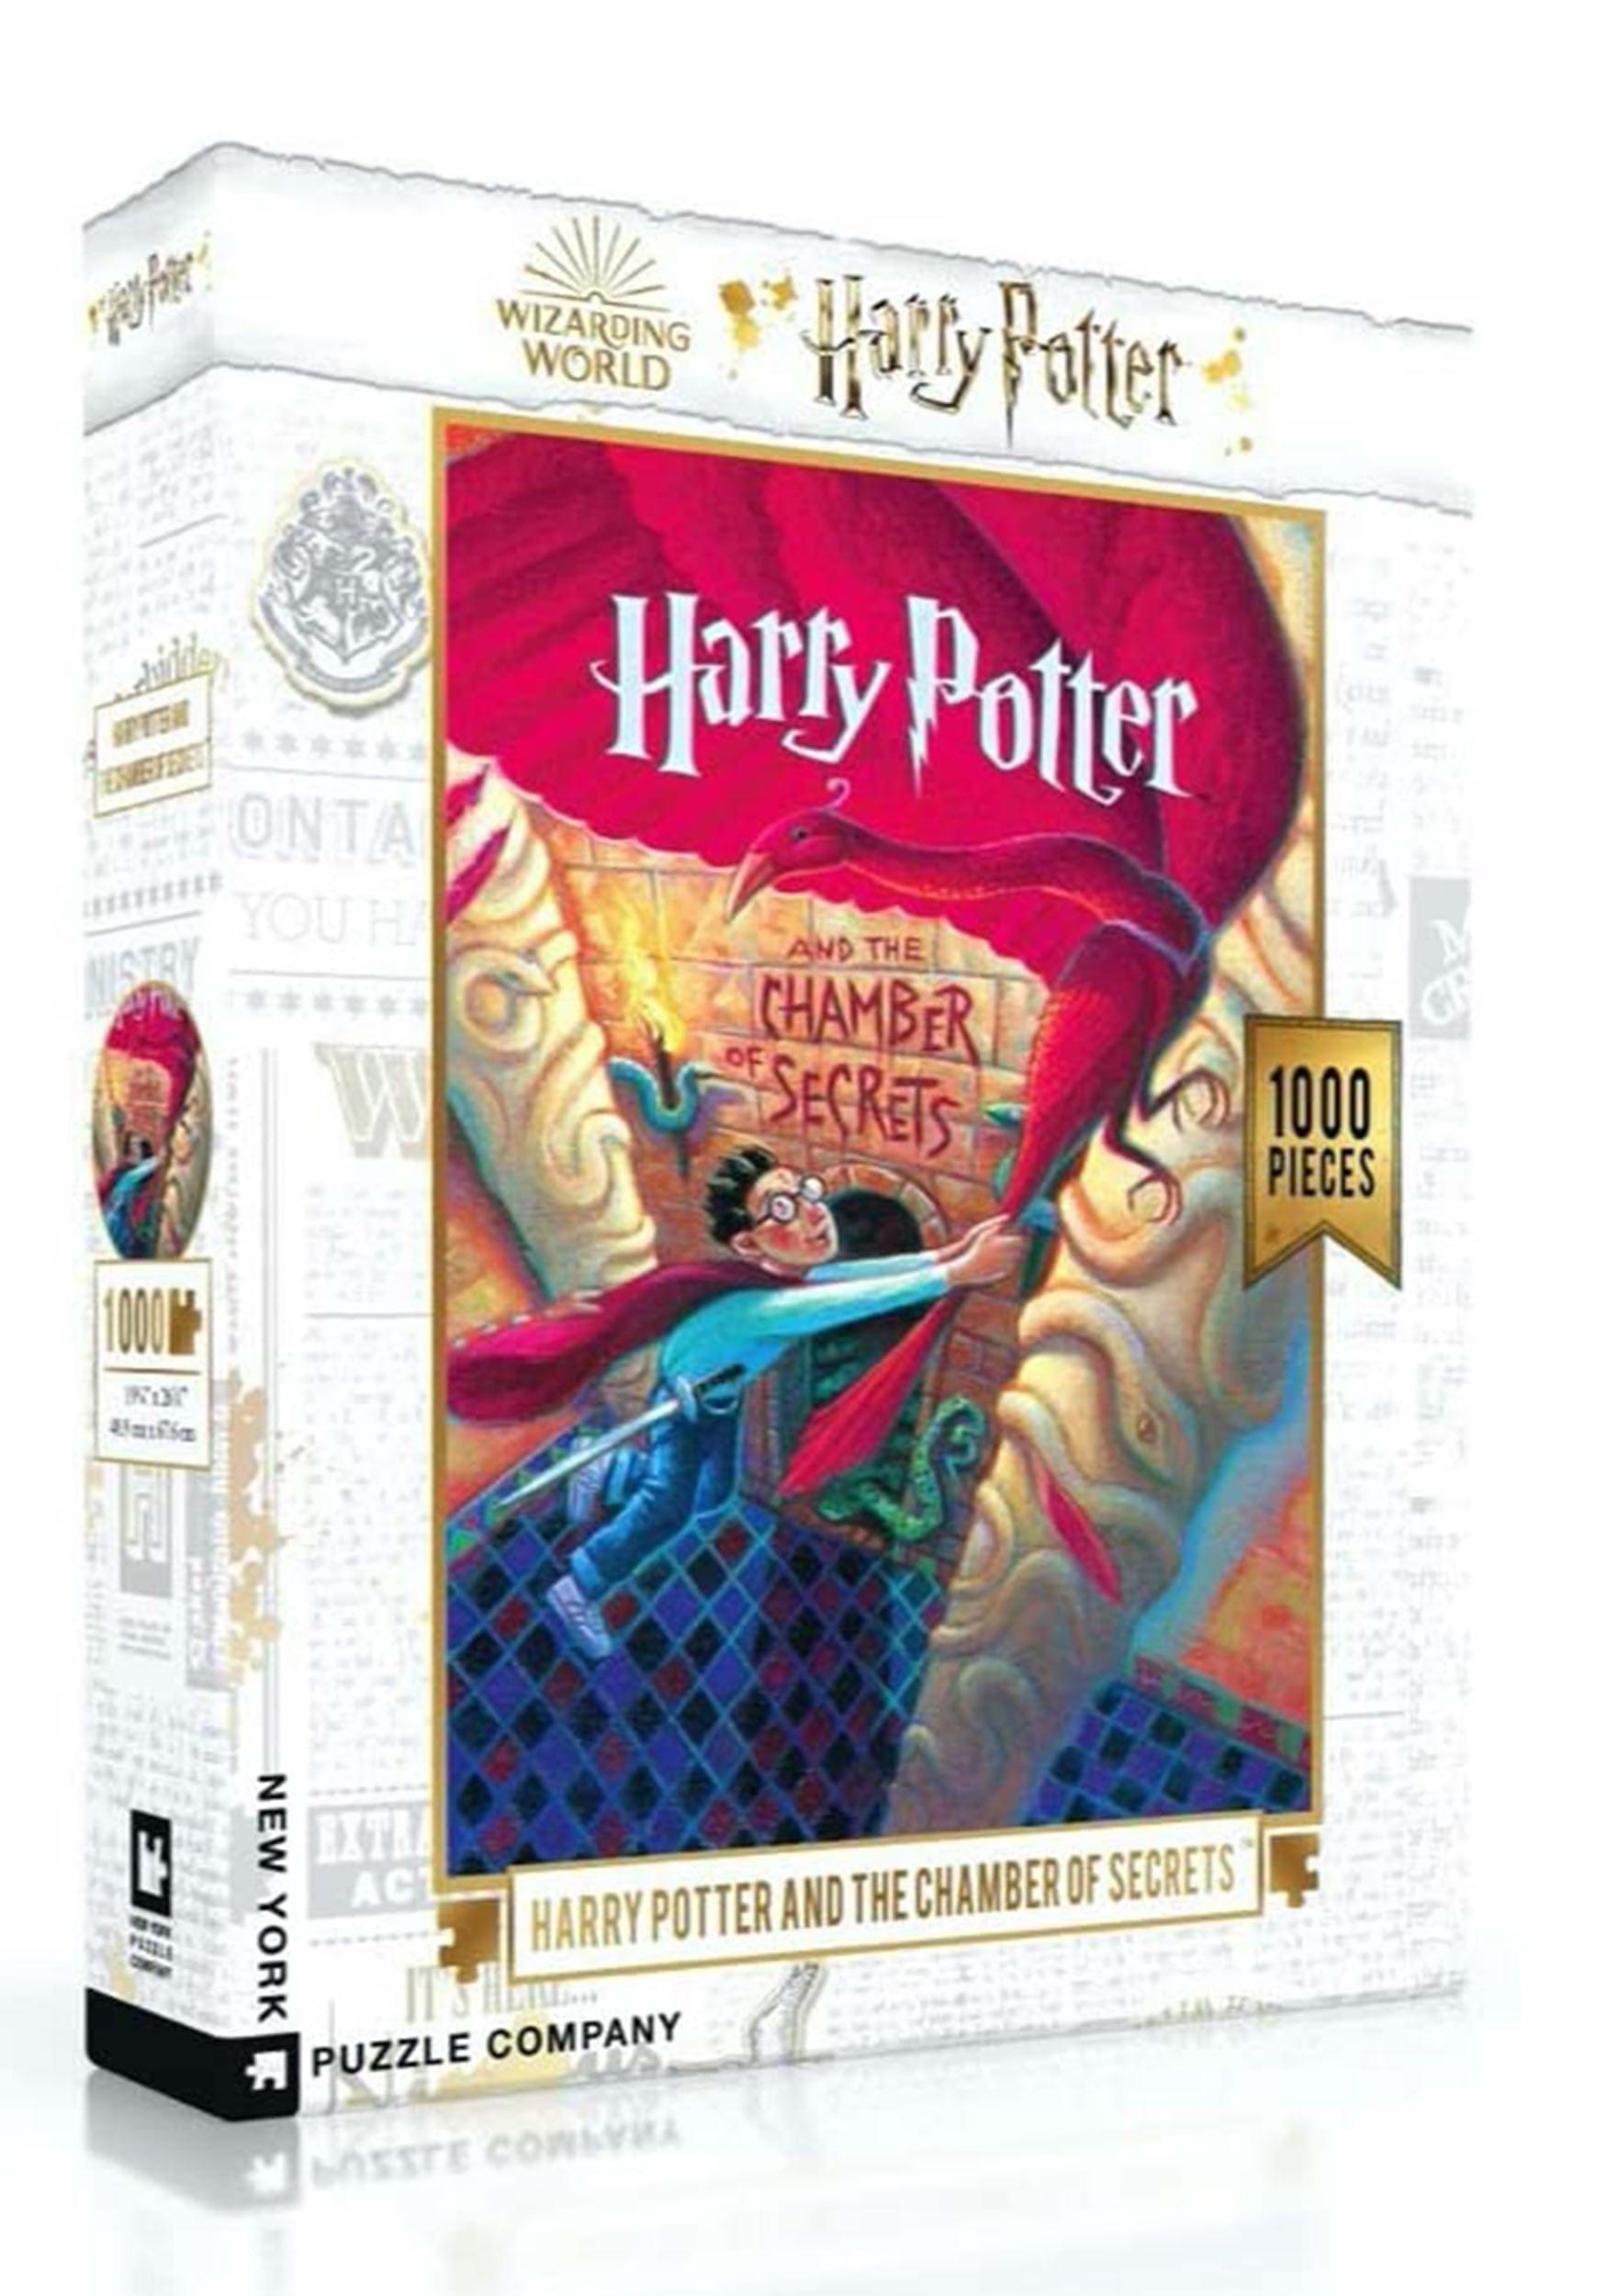 1000 pc Harry Potter and the Chamber of Secrets Jigsaw Puzzle